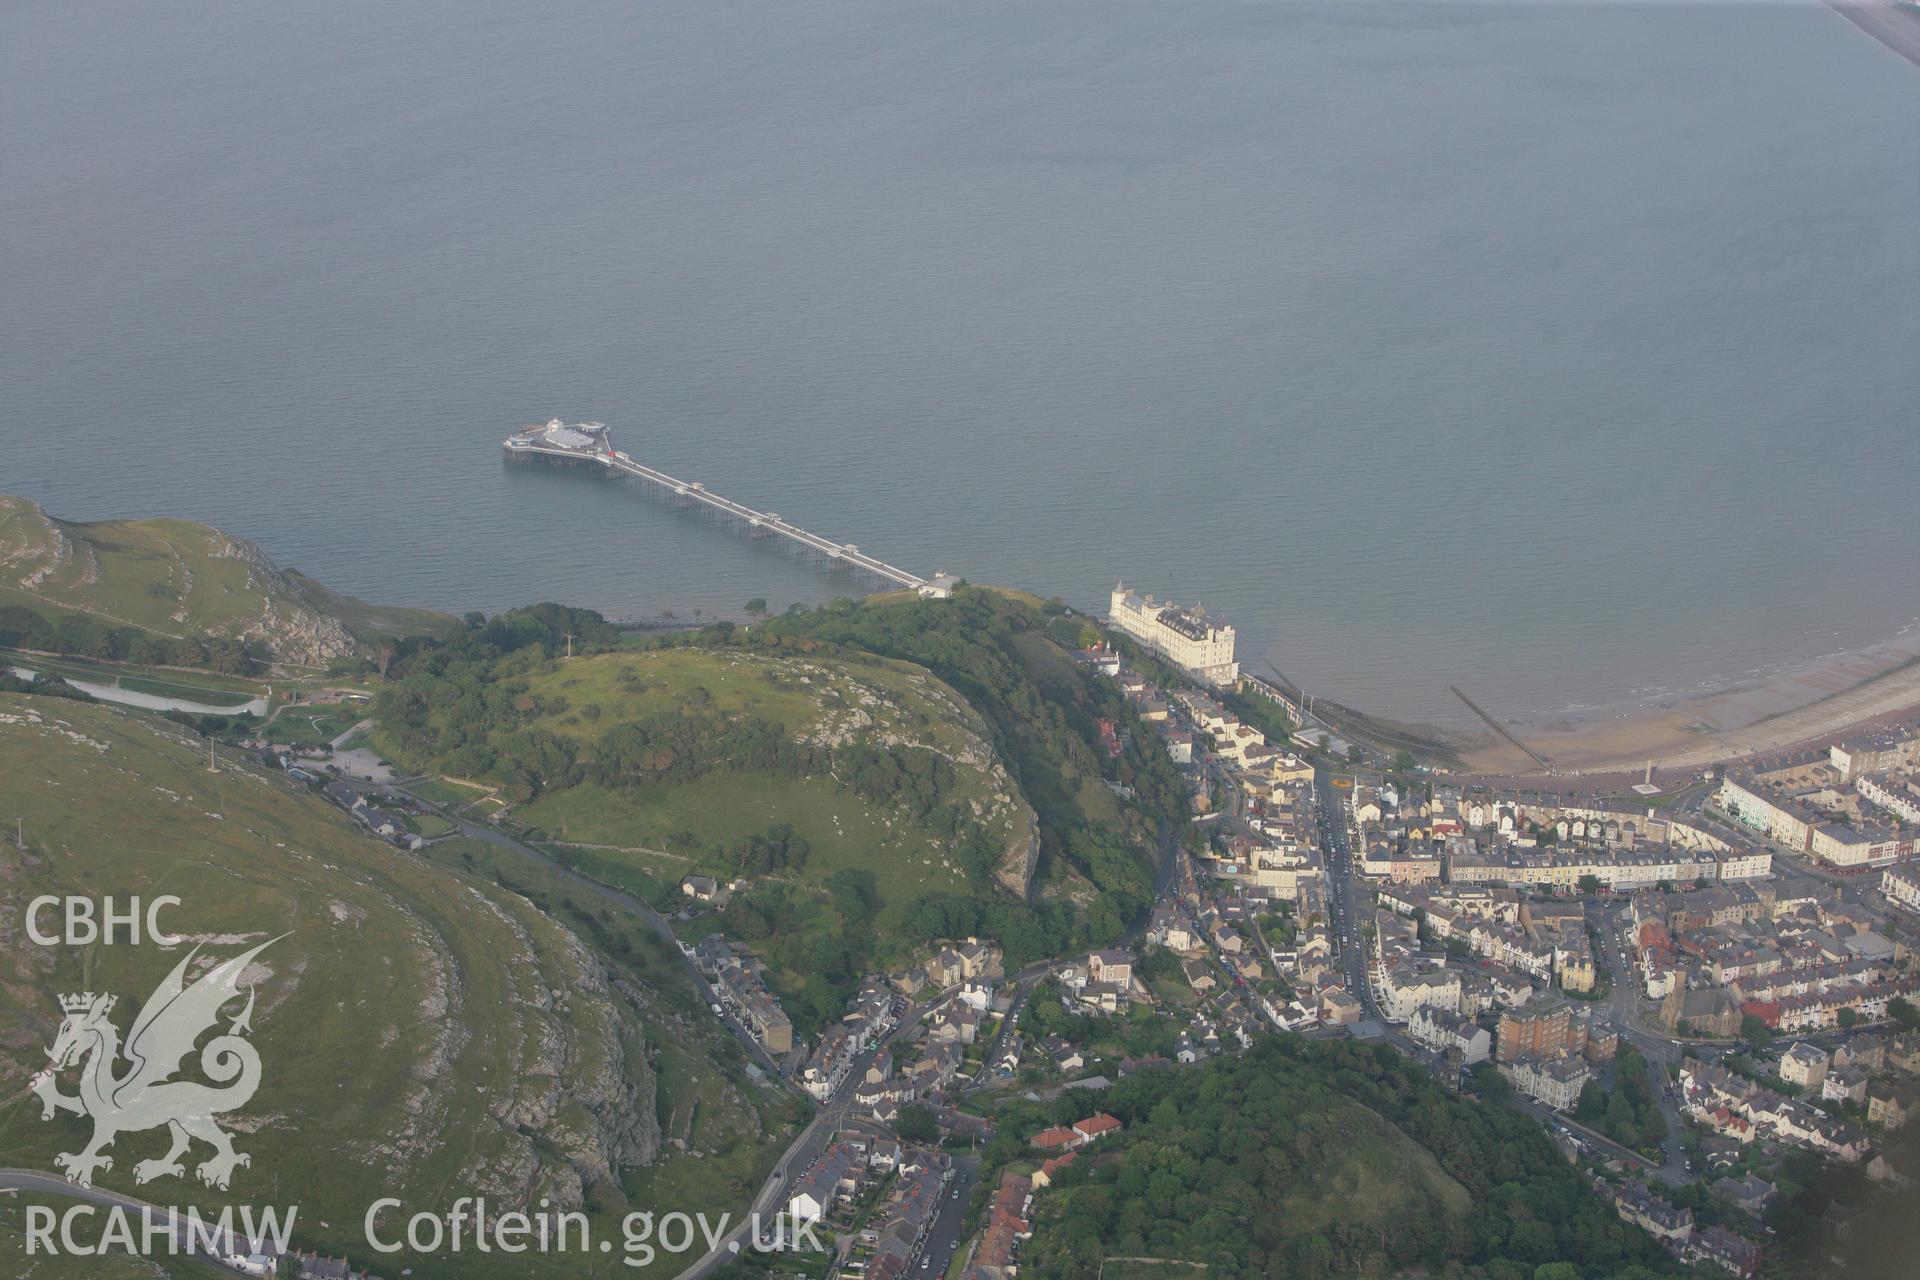 RCAHMW colour oblique photograph of Llandudno Pier, from the Great Orme. Taken by Toby Driver on 24/07/2008.